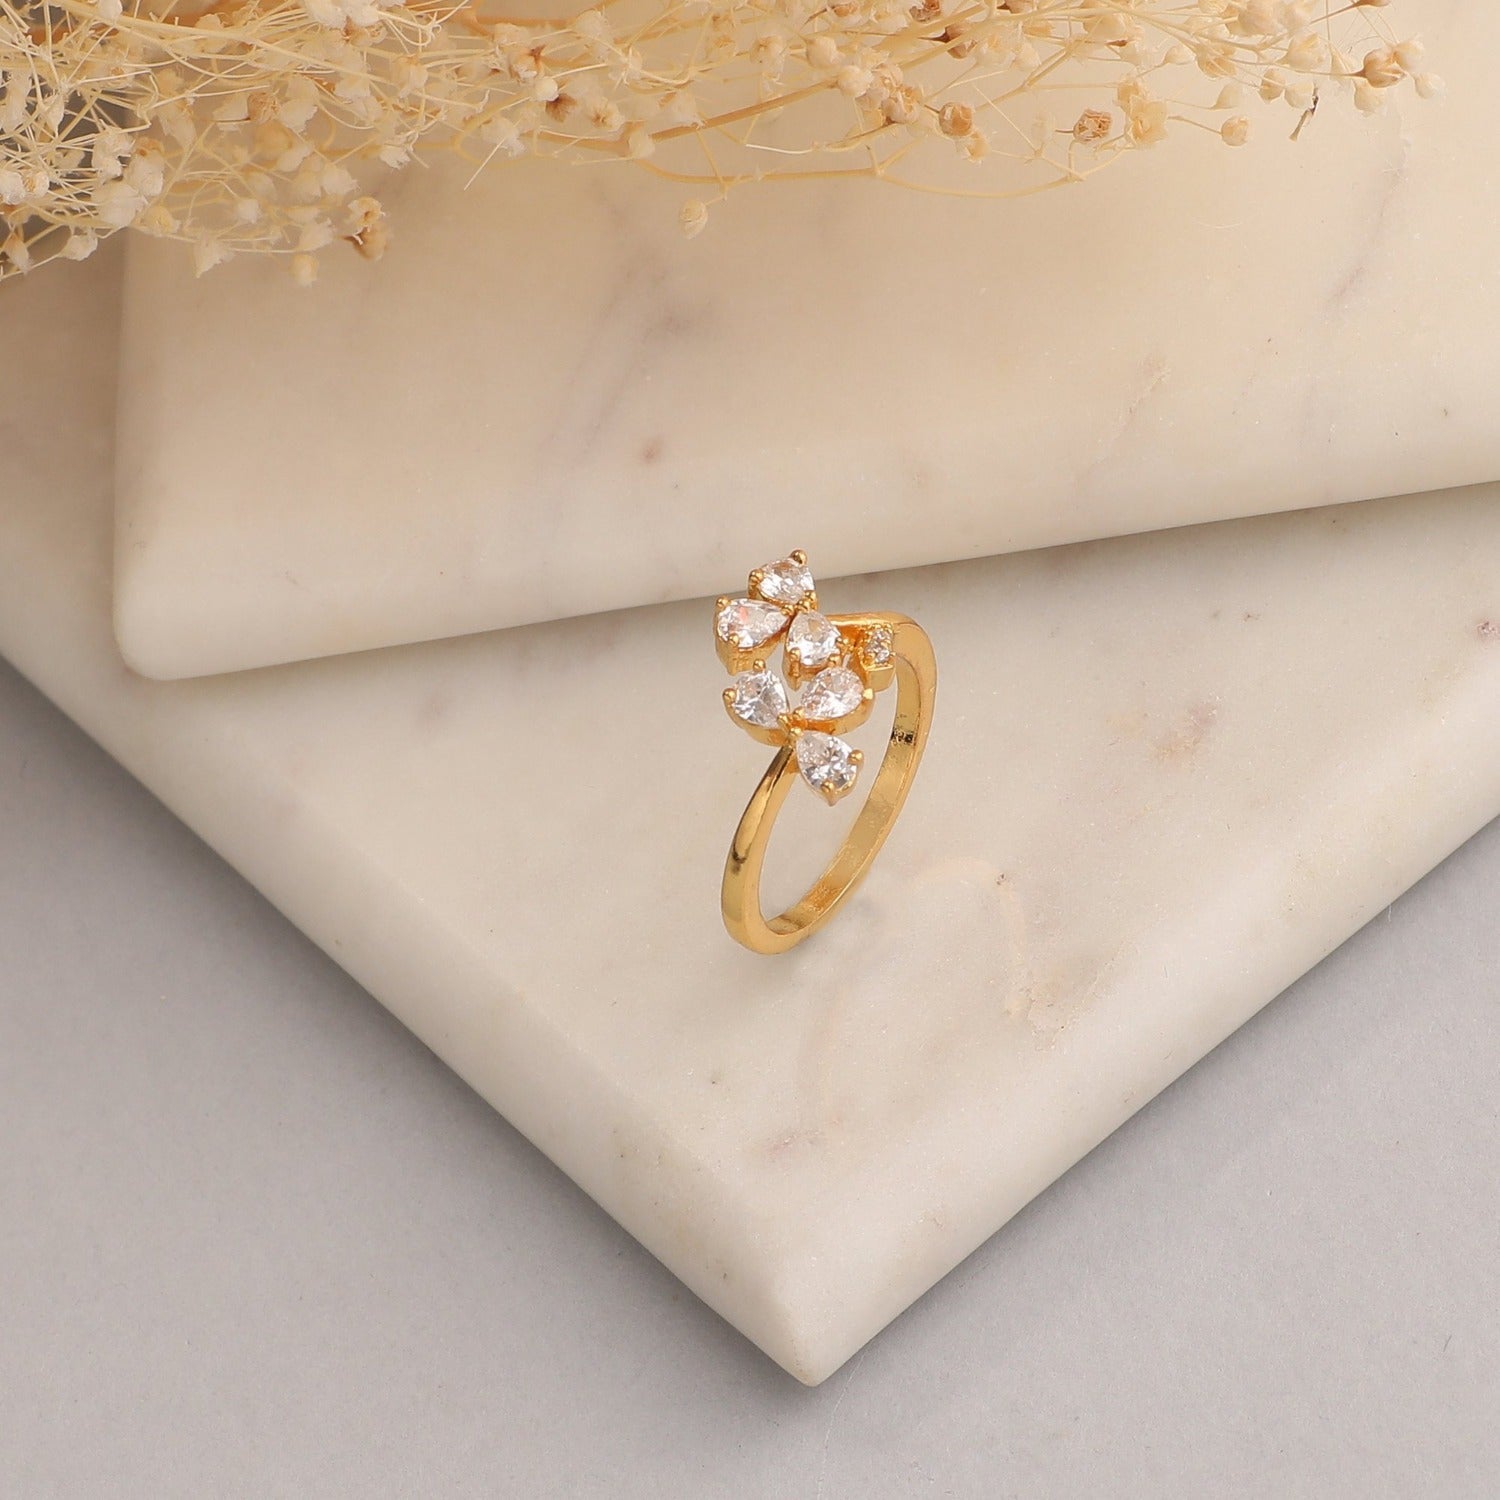 14k Delicate Diamond Celebration Band | Local Eclectic – local eclectic